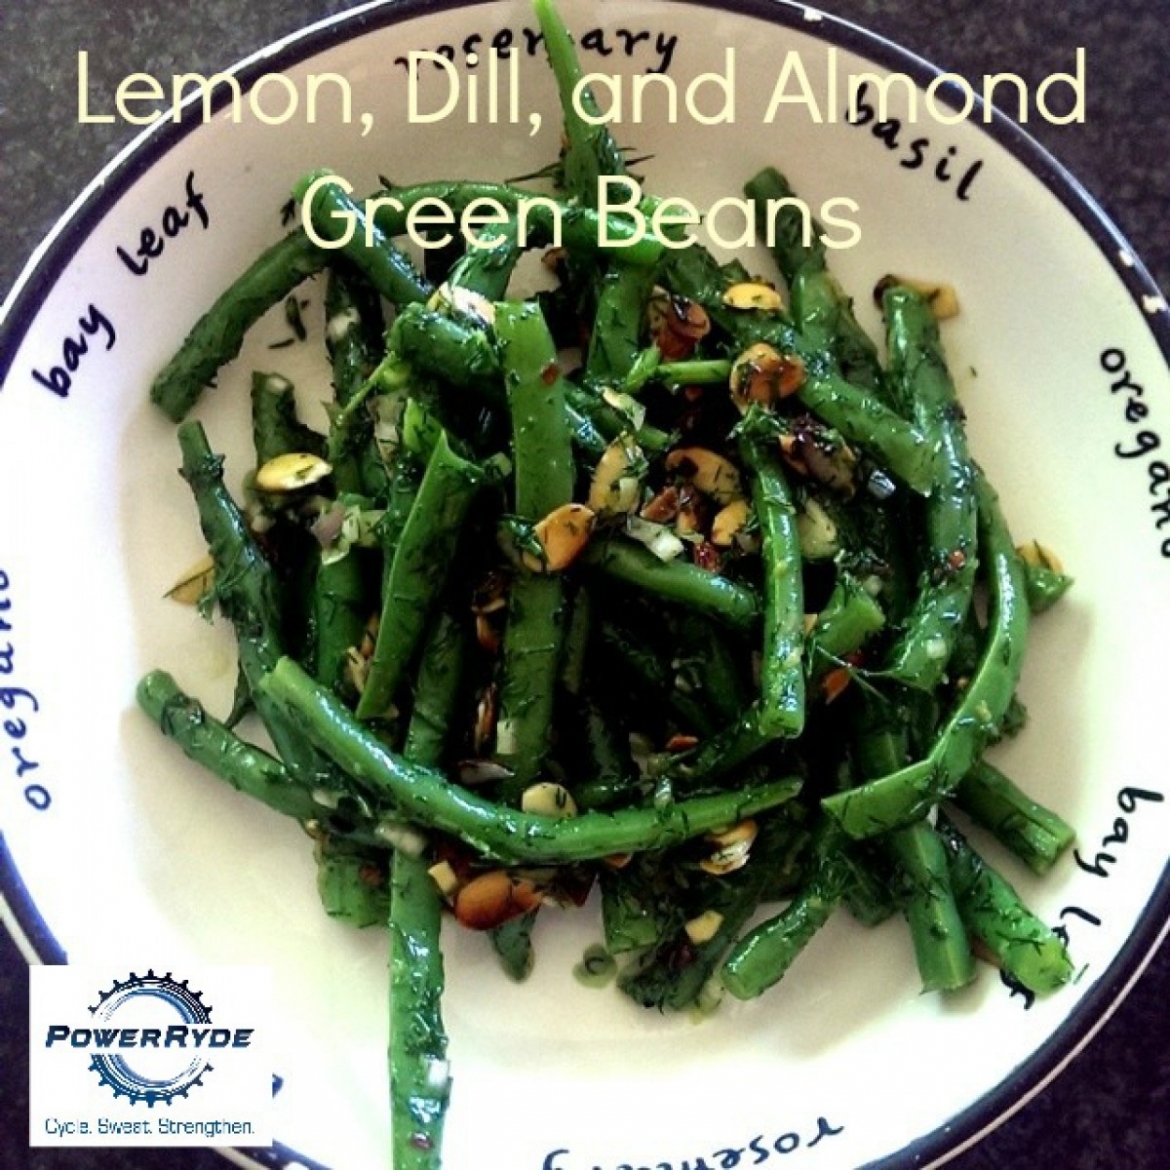 Lemon, Dill, and Almond Green Beans with PowerRyde logo